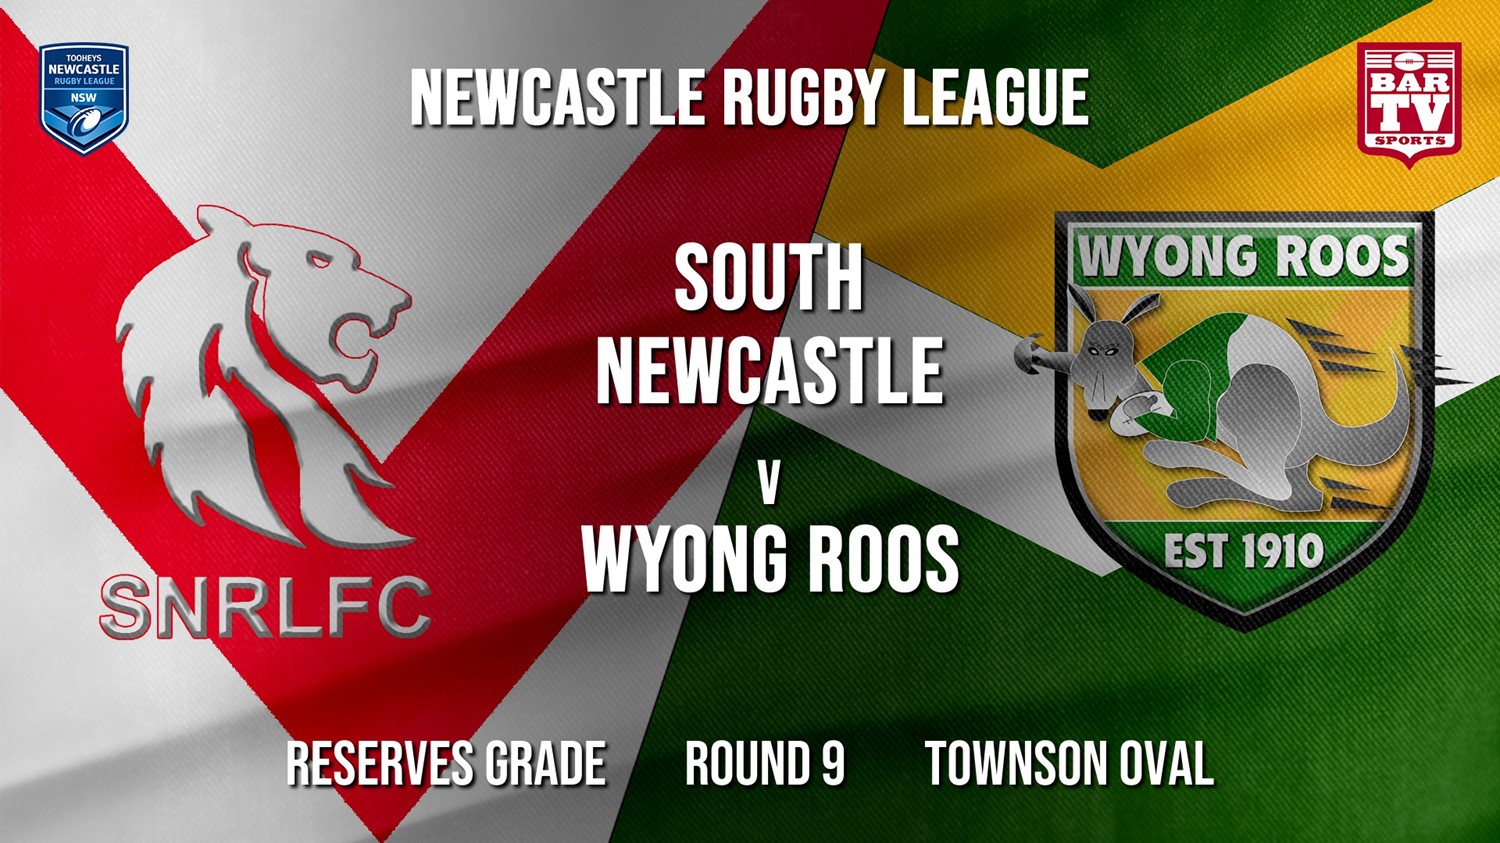 Newcastle Rugby League Round 9 - Reserves Grade - South Newcastle v Wyong Roos Slate Image